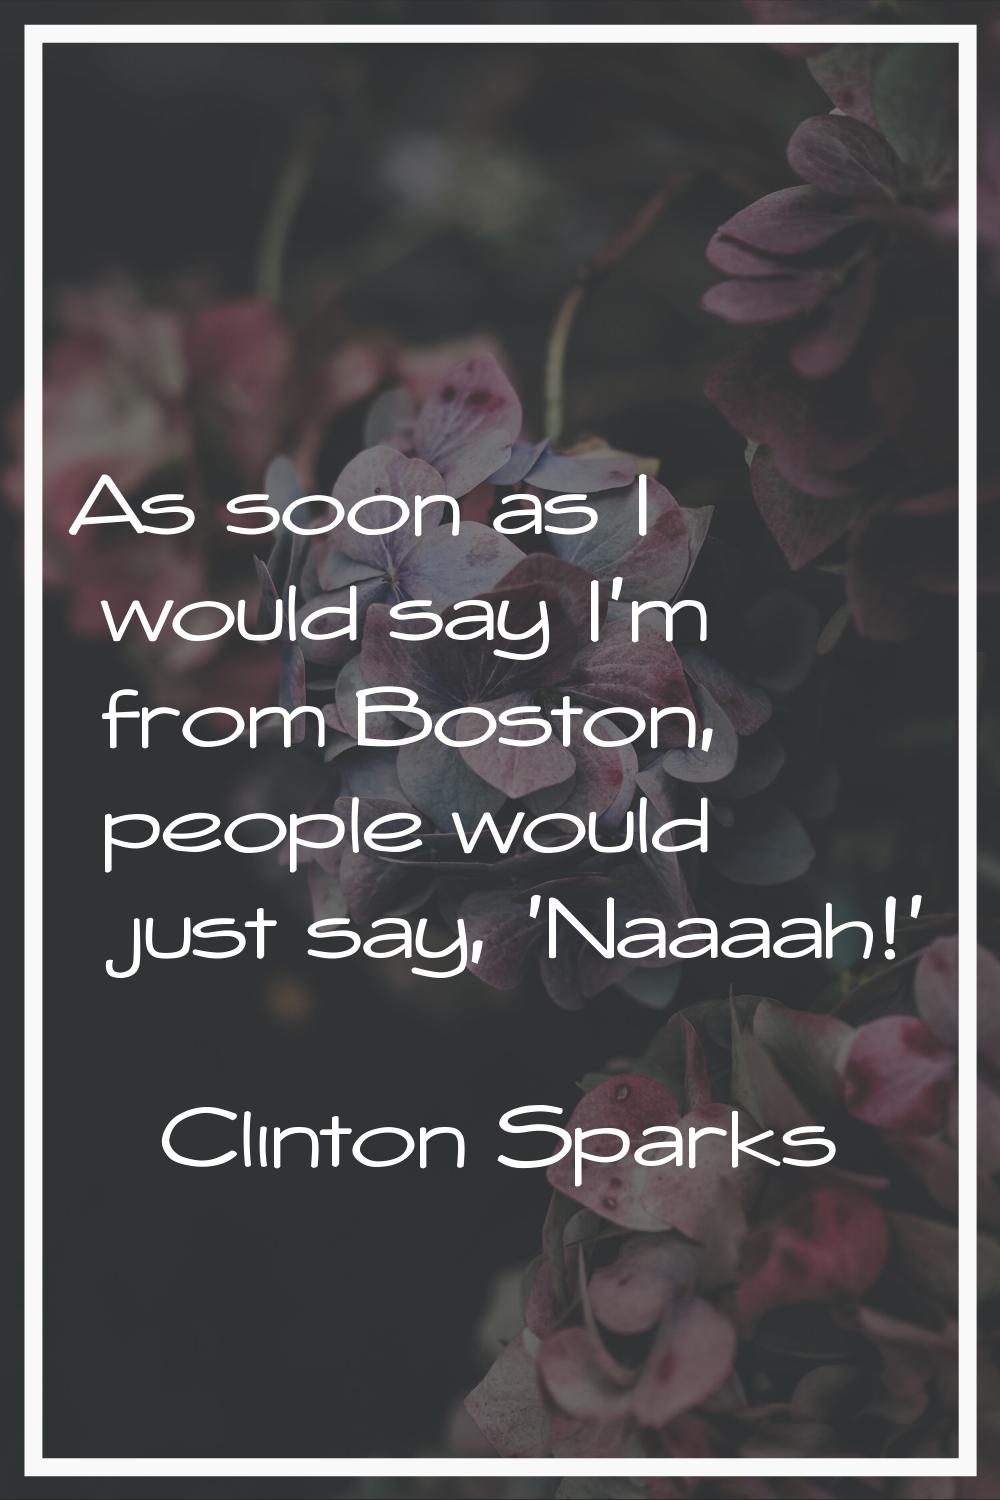 As soon as I would say I'm from Boston, people would just say, 'Naaaah!'